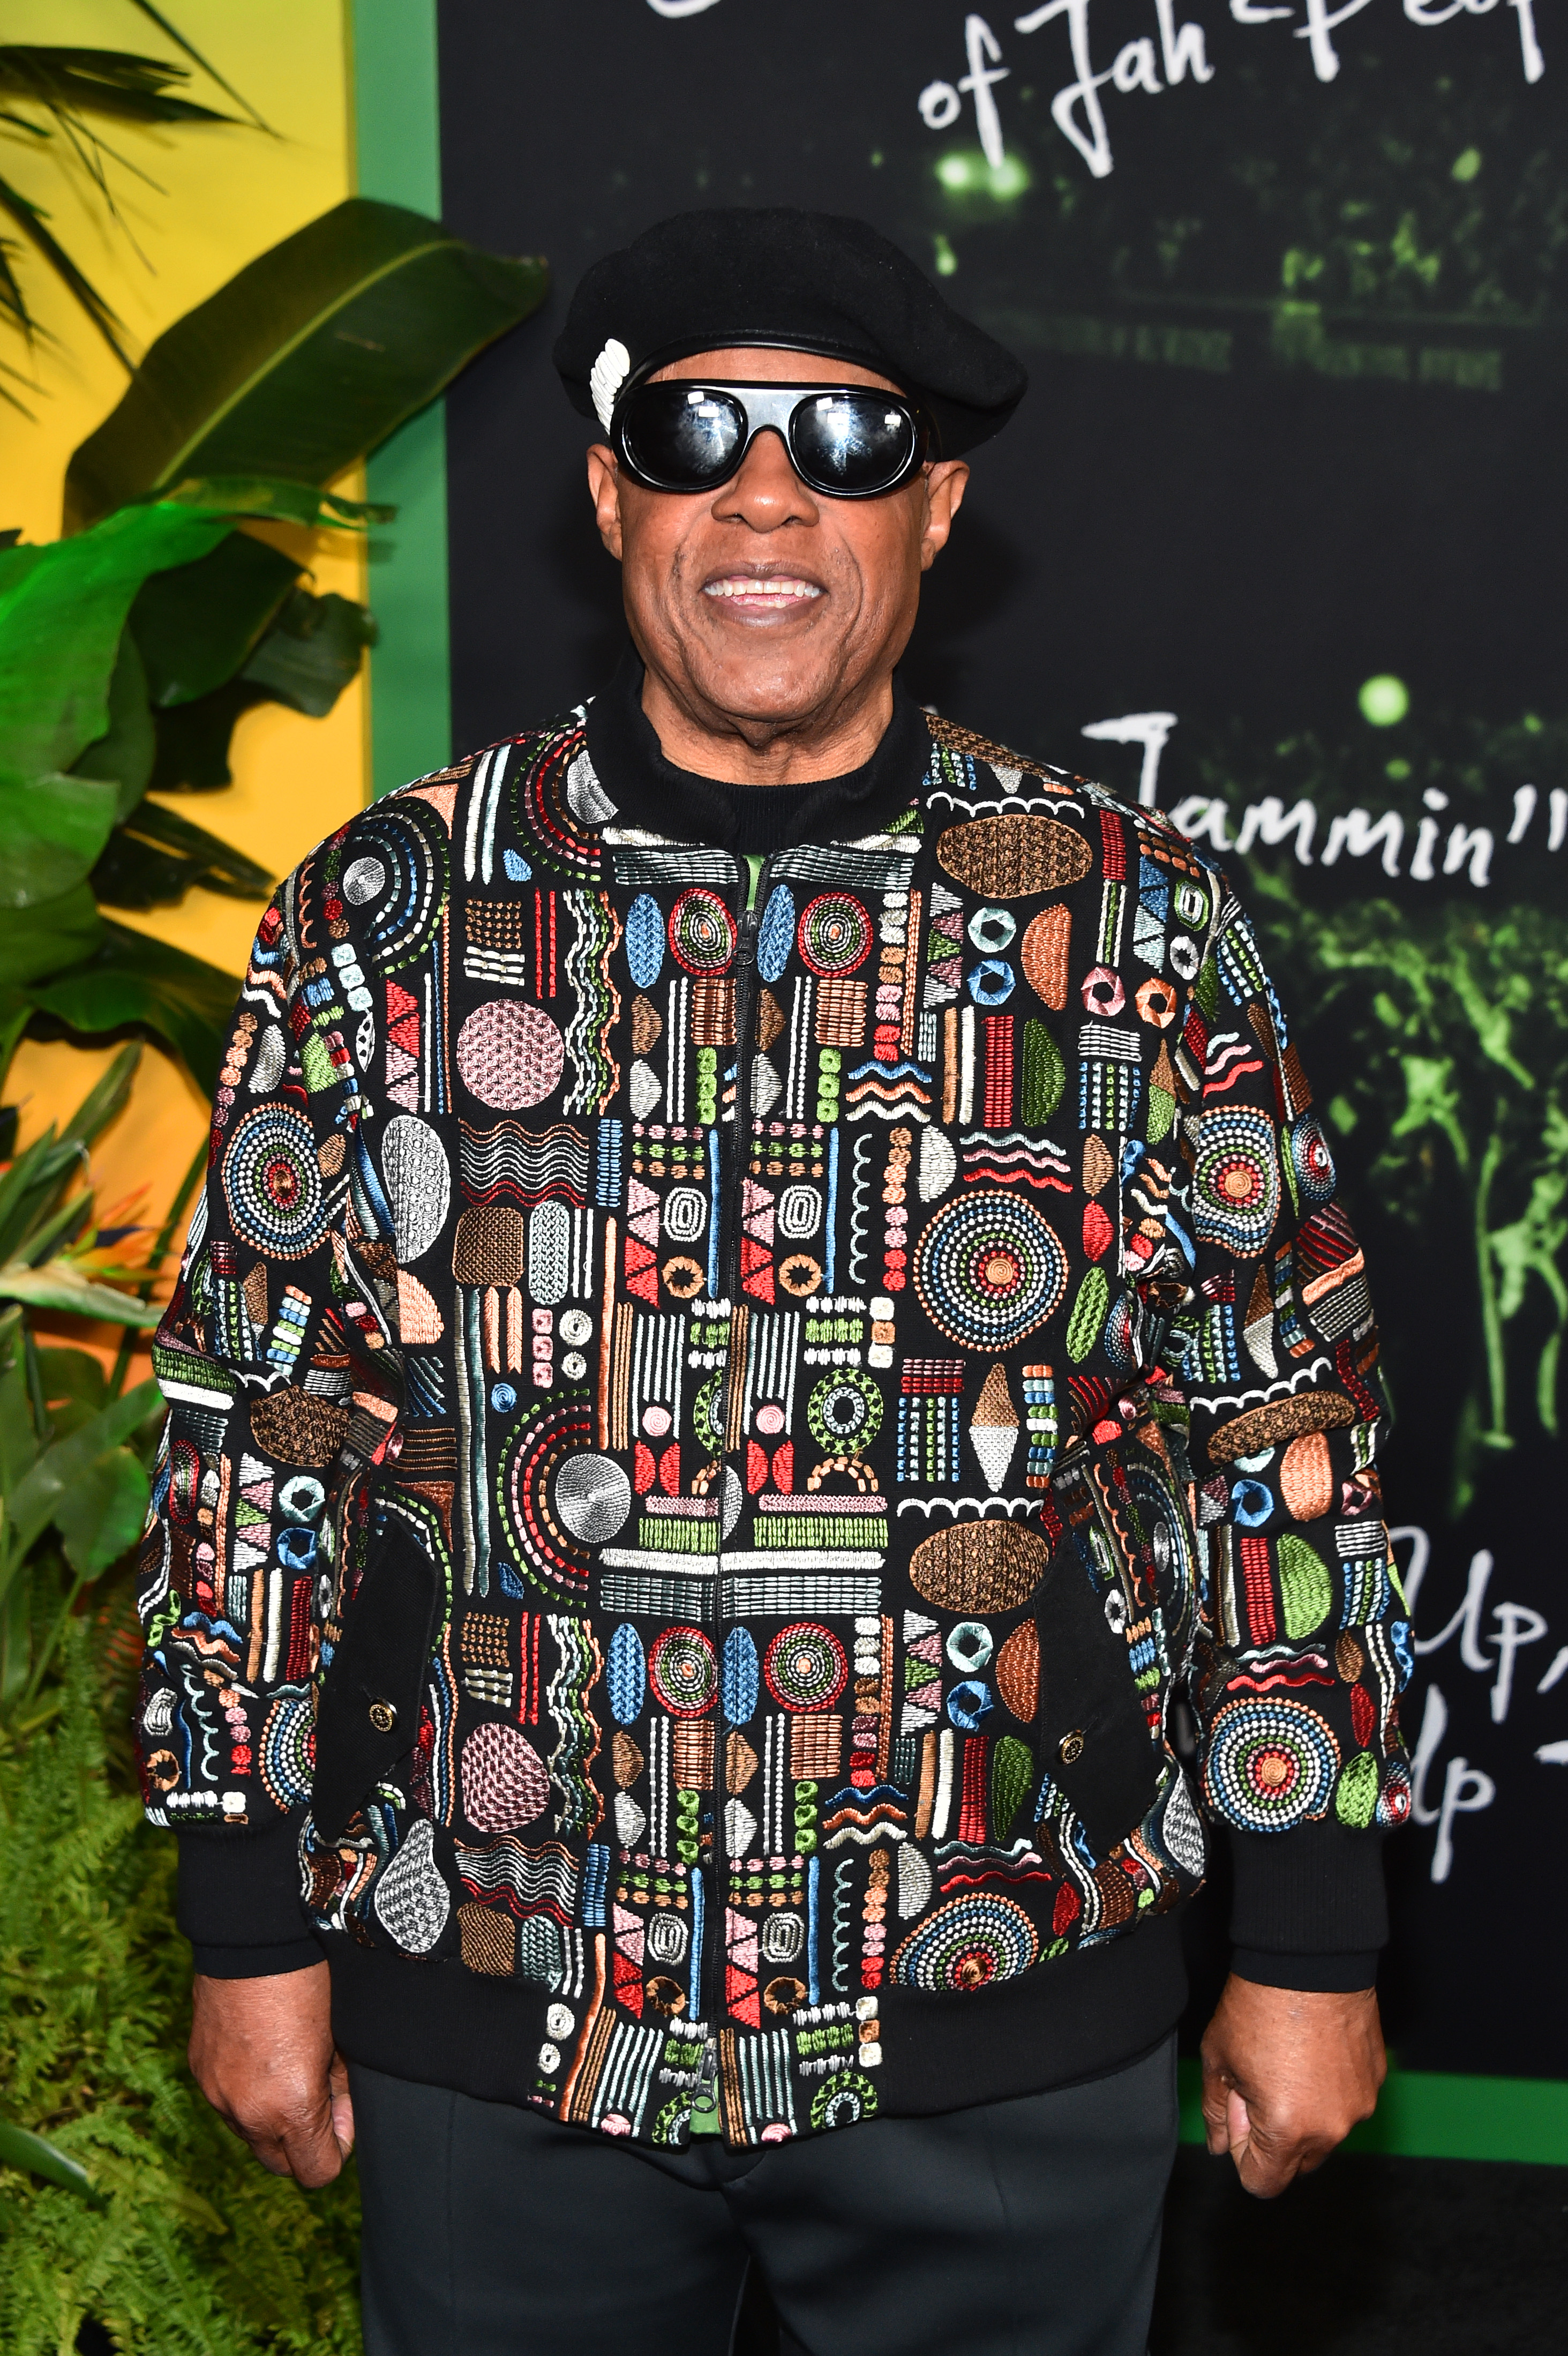 Los Angeles Premiere Of Paramount Pictures "Bob Marley: One Love"